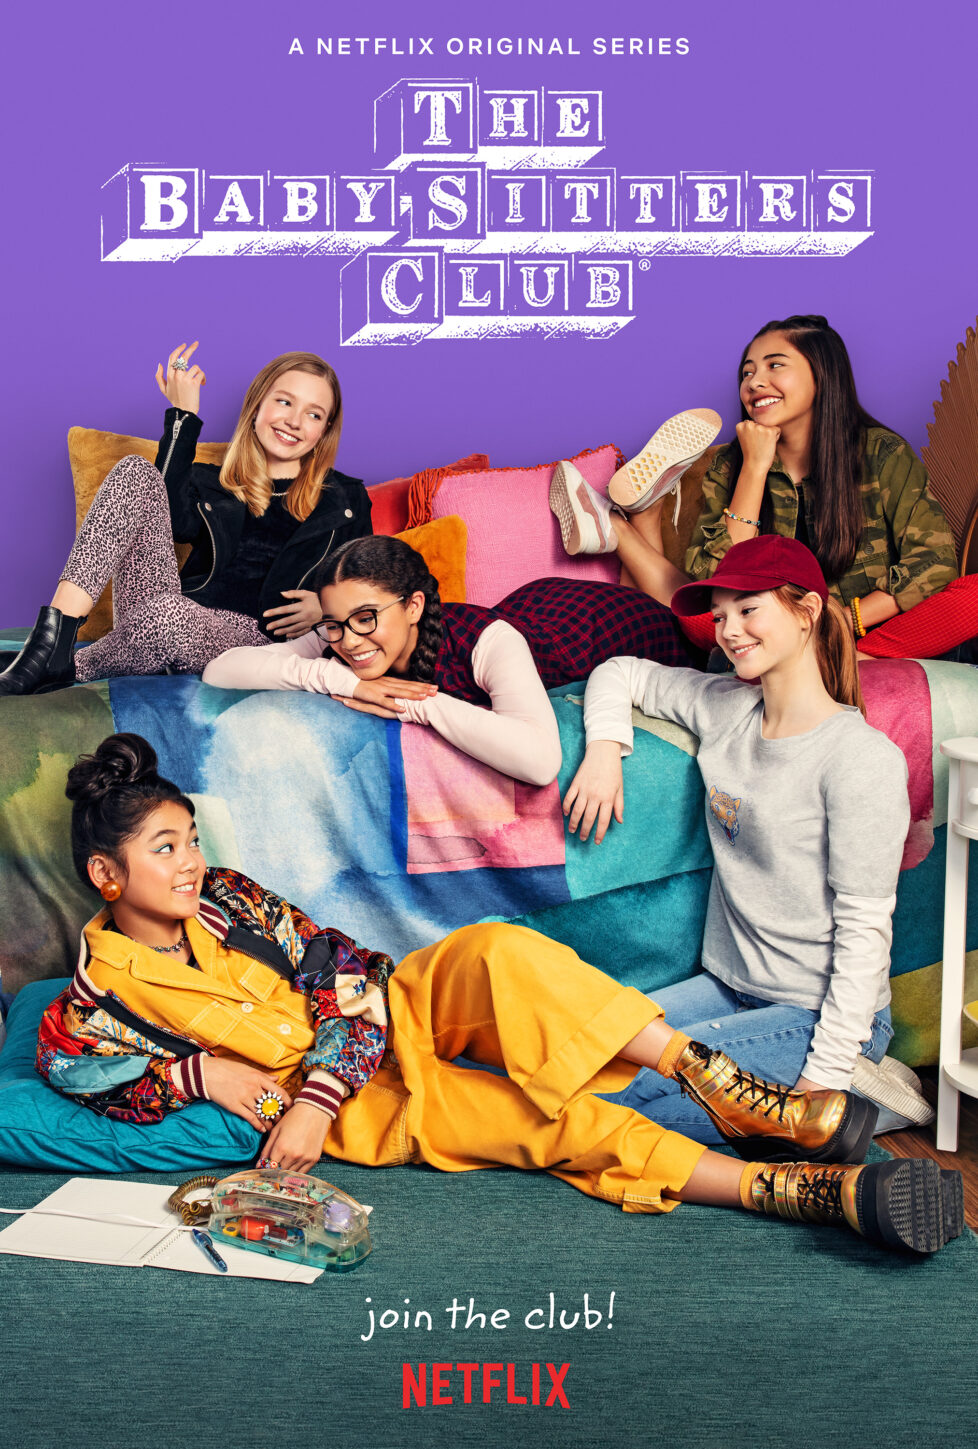 the babysitters club netflix poster